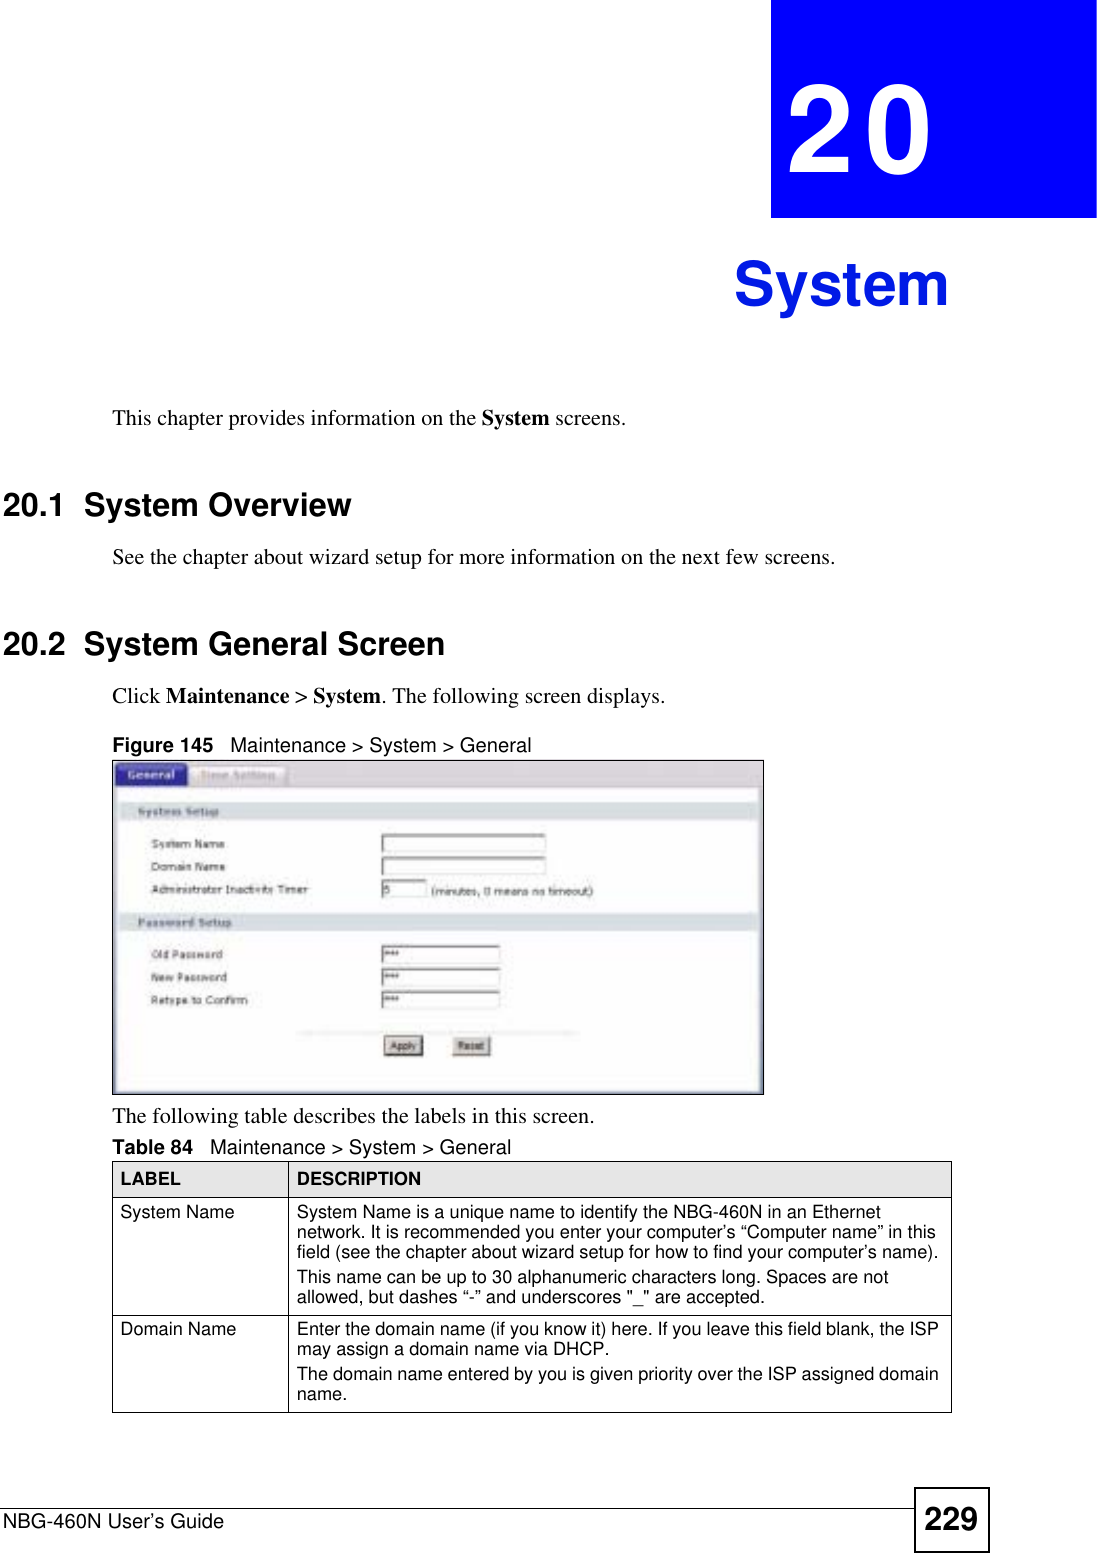 NBG-460N User’s Guide 229CHAPTER 20SystemThis chapter provides information on the System screens. 20.1  System OverviewSee the chapter about wizard setup for more information on the next few screens.20.2  System General Screen Click Maintenance &gt; System. The following screen displays.Figure 145   Maintenance &gt; System &gt; General The following table describes the labels in this screen.Table 84   Maintenance &gt; System &gt; GeneralLABEL DESCRIPTIONSystem Name System Name is a unique name to identify the NBG-460N in an Ethernet network. It is recommended you enter your computer’s “Computer name” in this field (see the chapter about wizard setup for how to find your computer’s name). This name can be up to 30 alphanumeric characters long. Spaces are not allowed, but dashes “-” and underscores &quot;_&quot; are accepted.Domain Name Enter the domain name (if you know it) here. If you leave this field blank, the ISP may assign a domain name via DHCP. The domain name entered by you is given priority over the ISP assigned domain name.